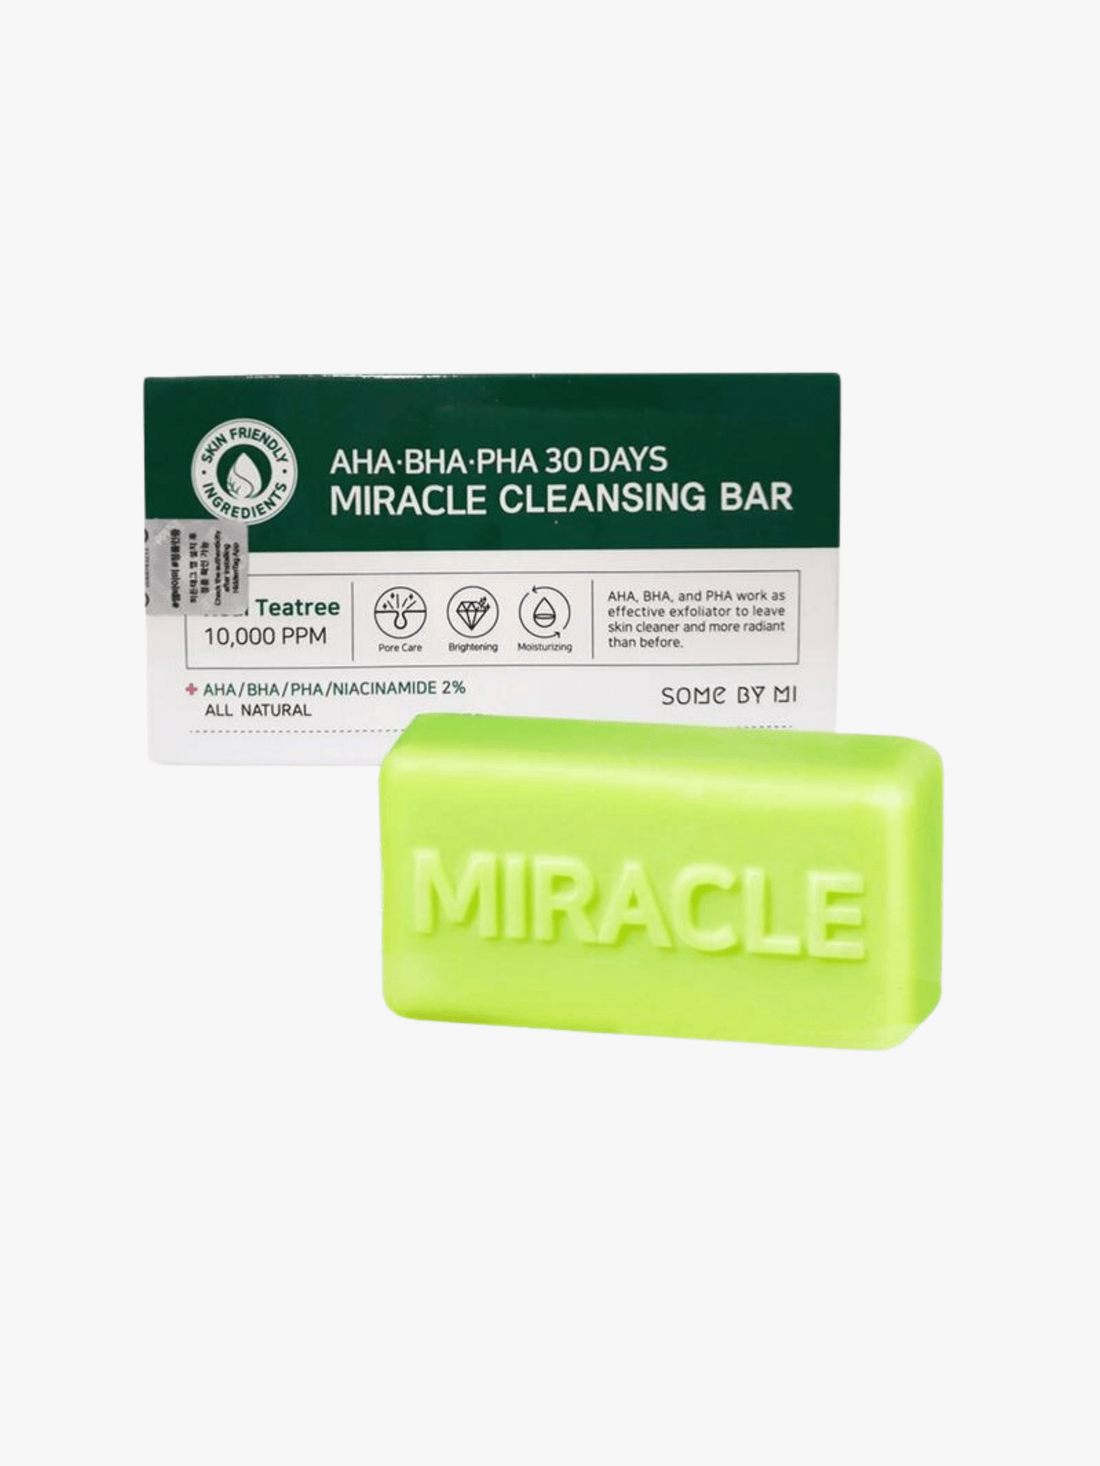 Some By Mi - Cleanser - AHA BHA PHA Miracle Acne Cleansing Bar